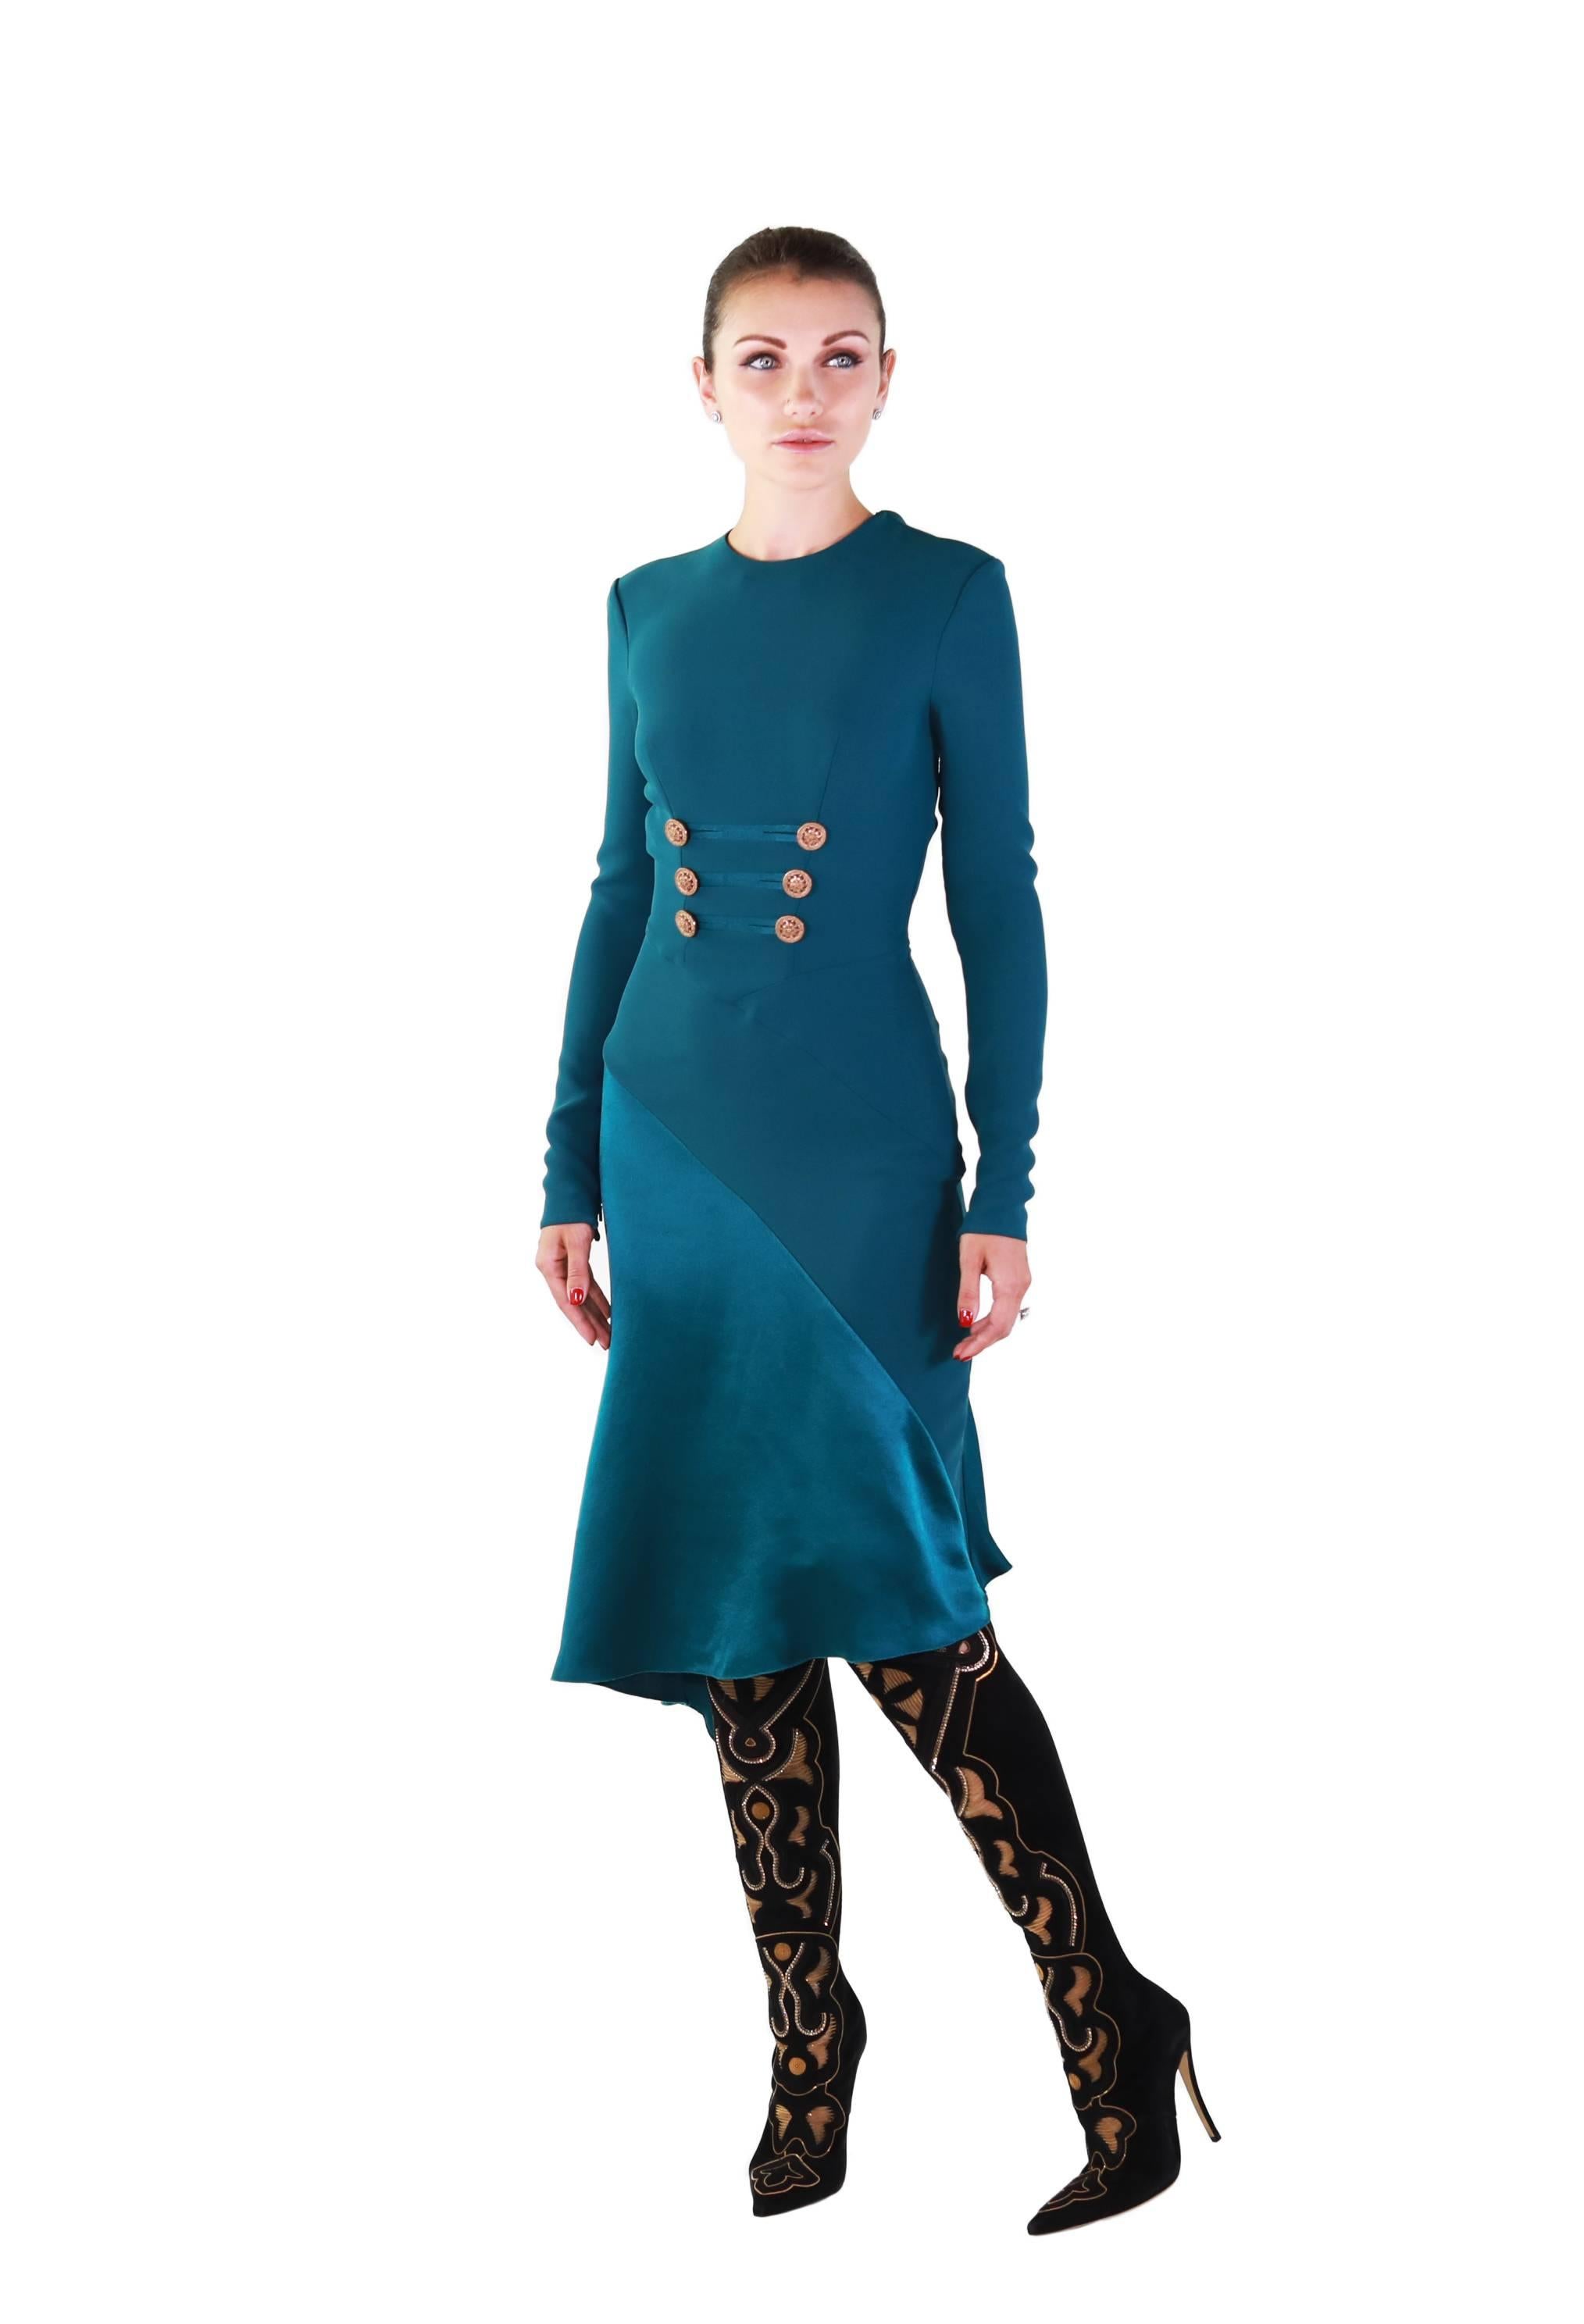 New 
Versace 

Petrol Blue Silk Military Inspired Dress

Crystal embellished buttons

Content: 100% silk,
outer fabric: 100% viscose,
lining: 100% silk



IT Size 38 - US 2

armpit to armpit 16